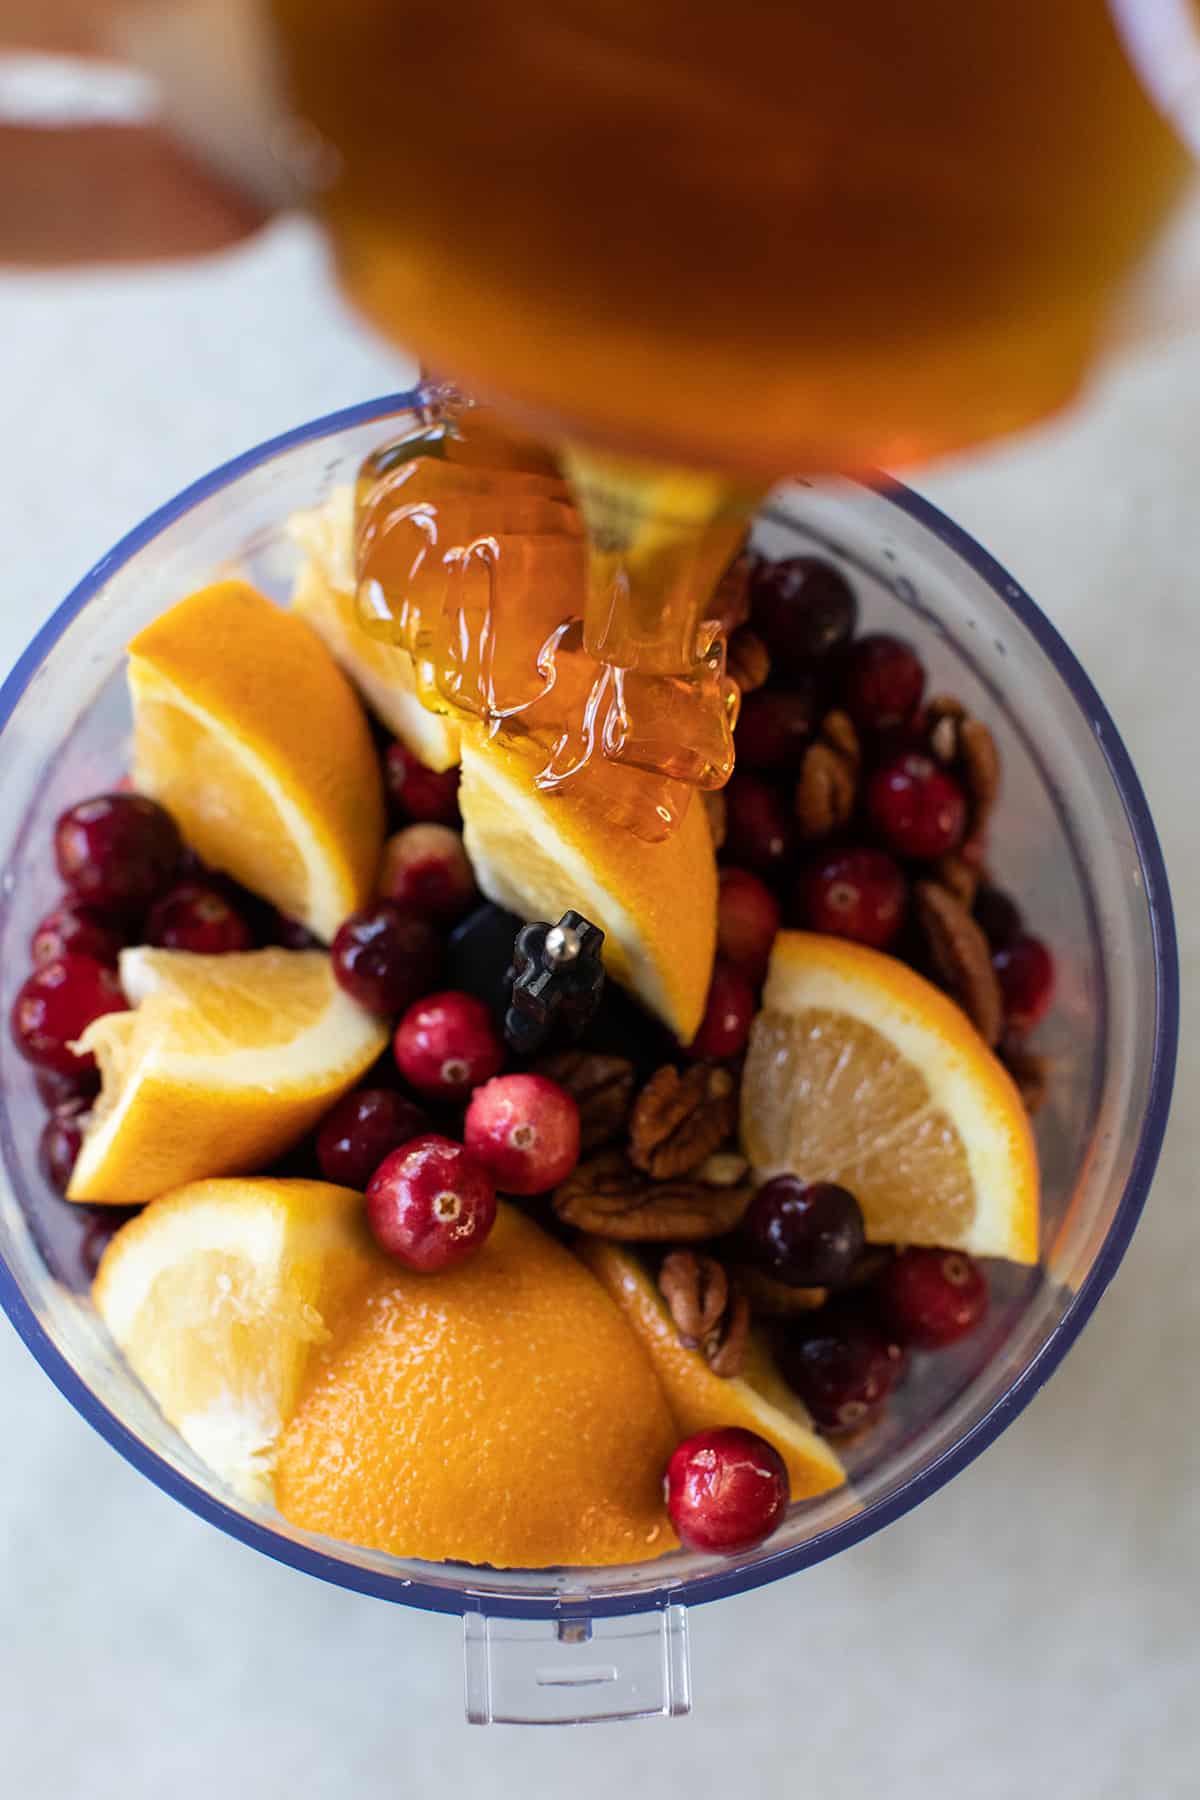 Pouring honey into cranberries and oranges.